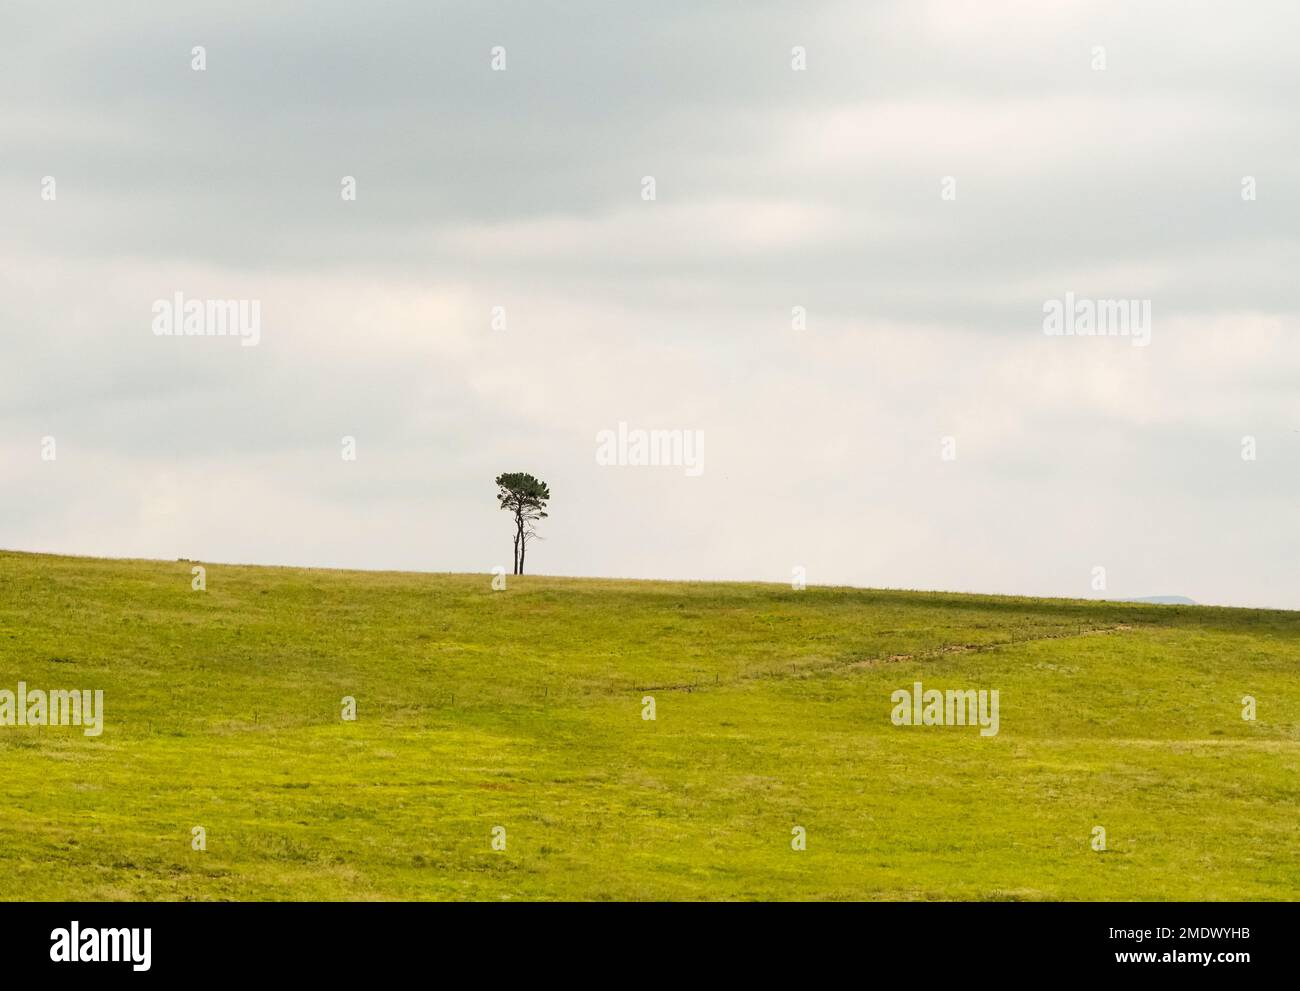 landscape of a single lone tree on a green hill against a cloudy sky concept solitude, peaceful, tranquility, quietness, aloneness, minimalism,silence Stock Photo